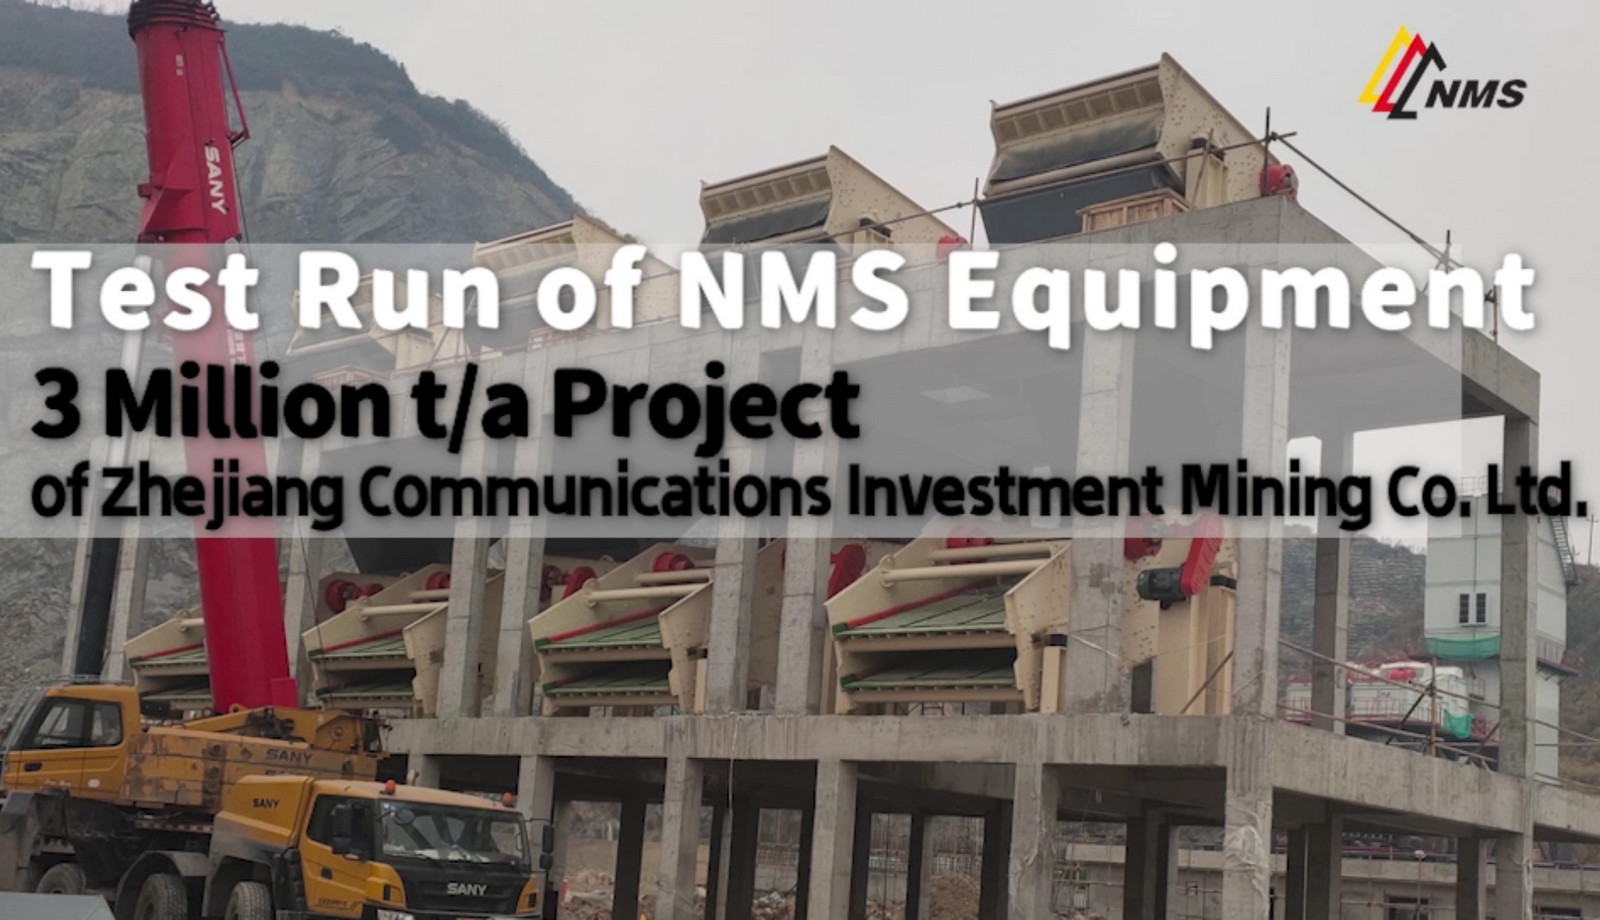 【#NMS_Cooperation】Test Run of NMS Equipment in Zhejiang CIM Project